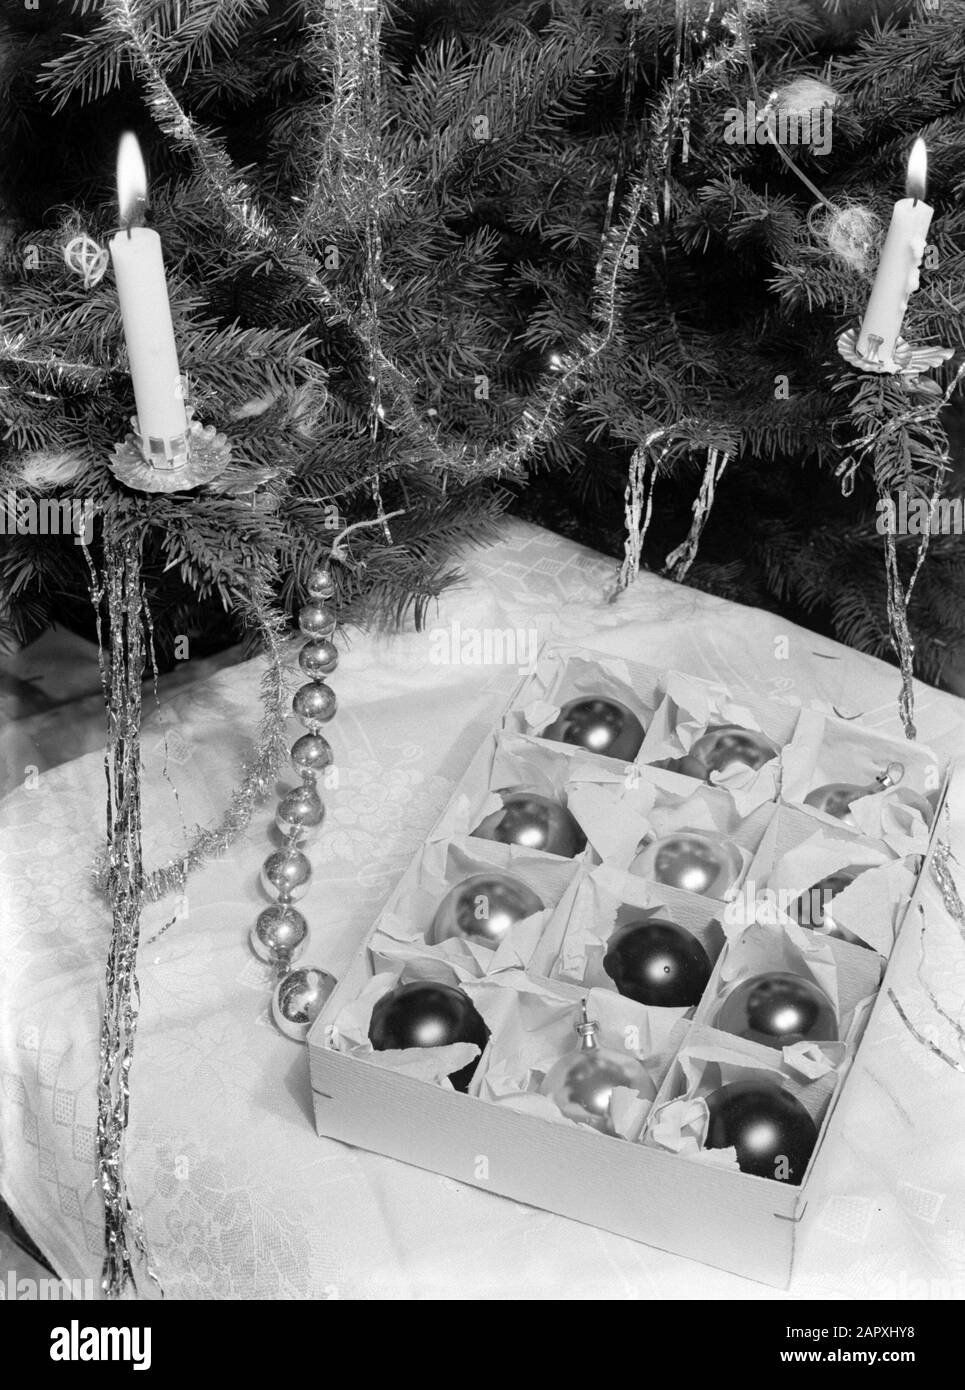 Advertising photography Still life of a Christmas tree with ...